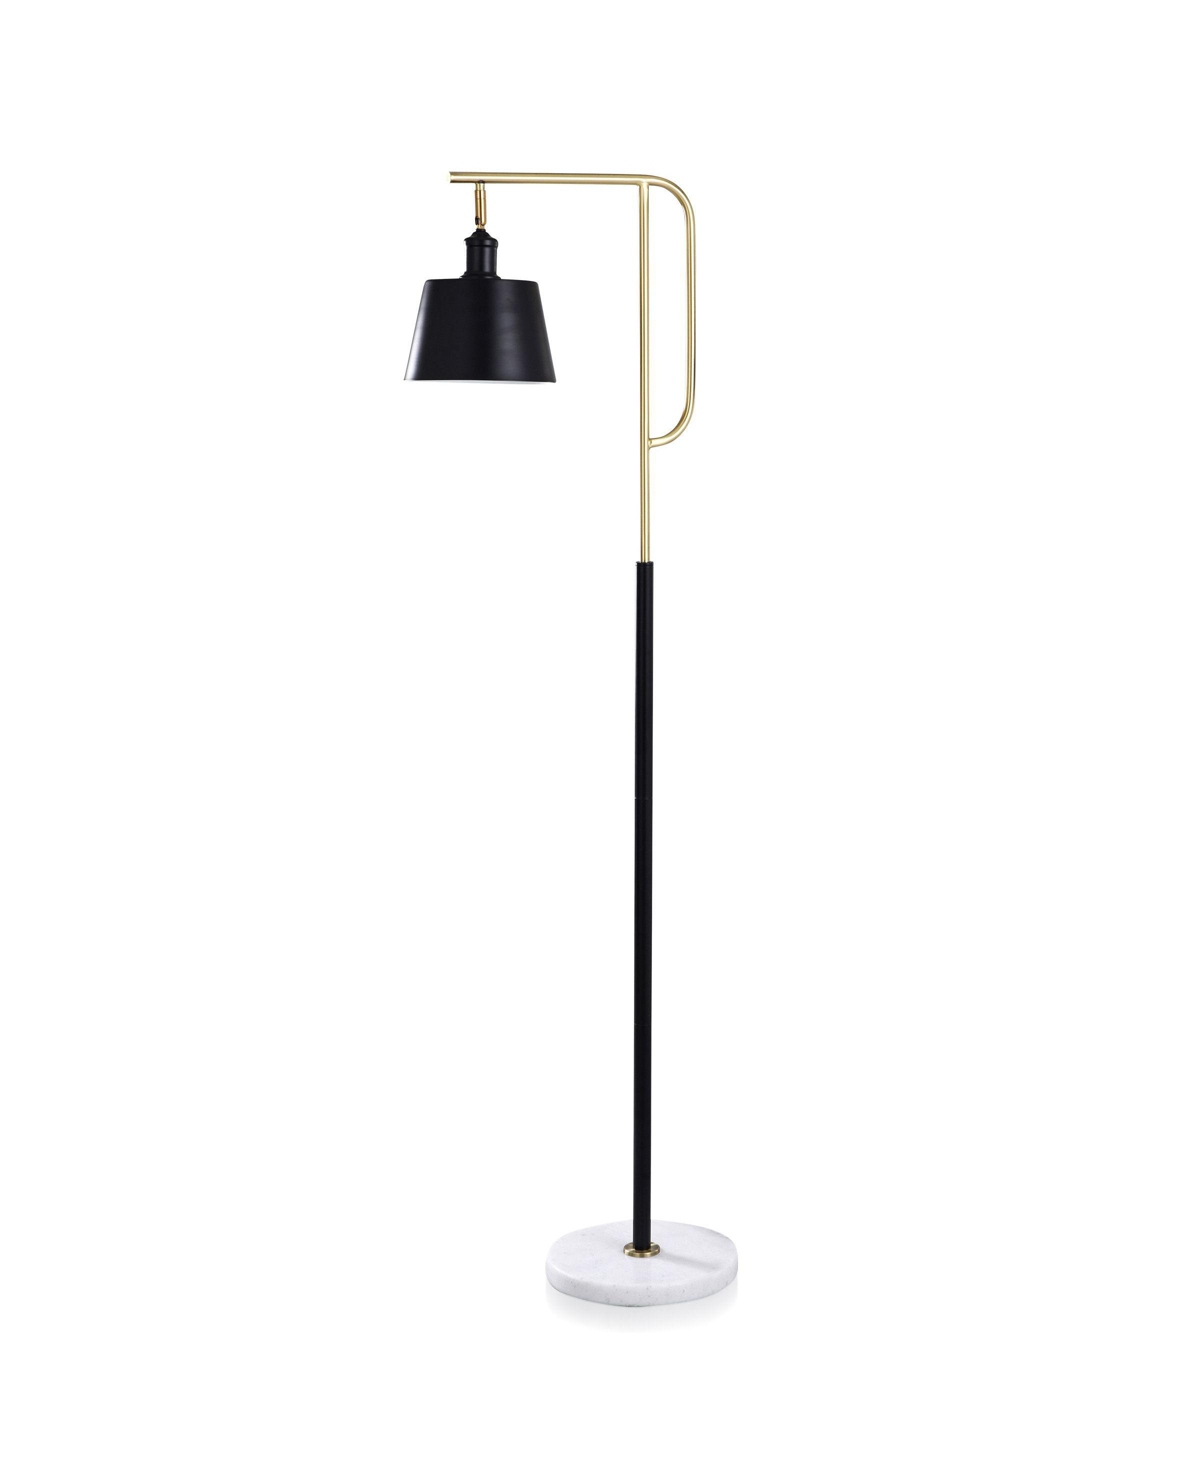 Stylecraft Home Collection 60" Canella Contemporary Steel Marble Base Floor Lamp In Black And Gold Brushed,white Marble